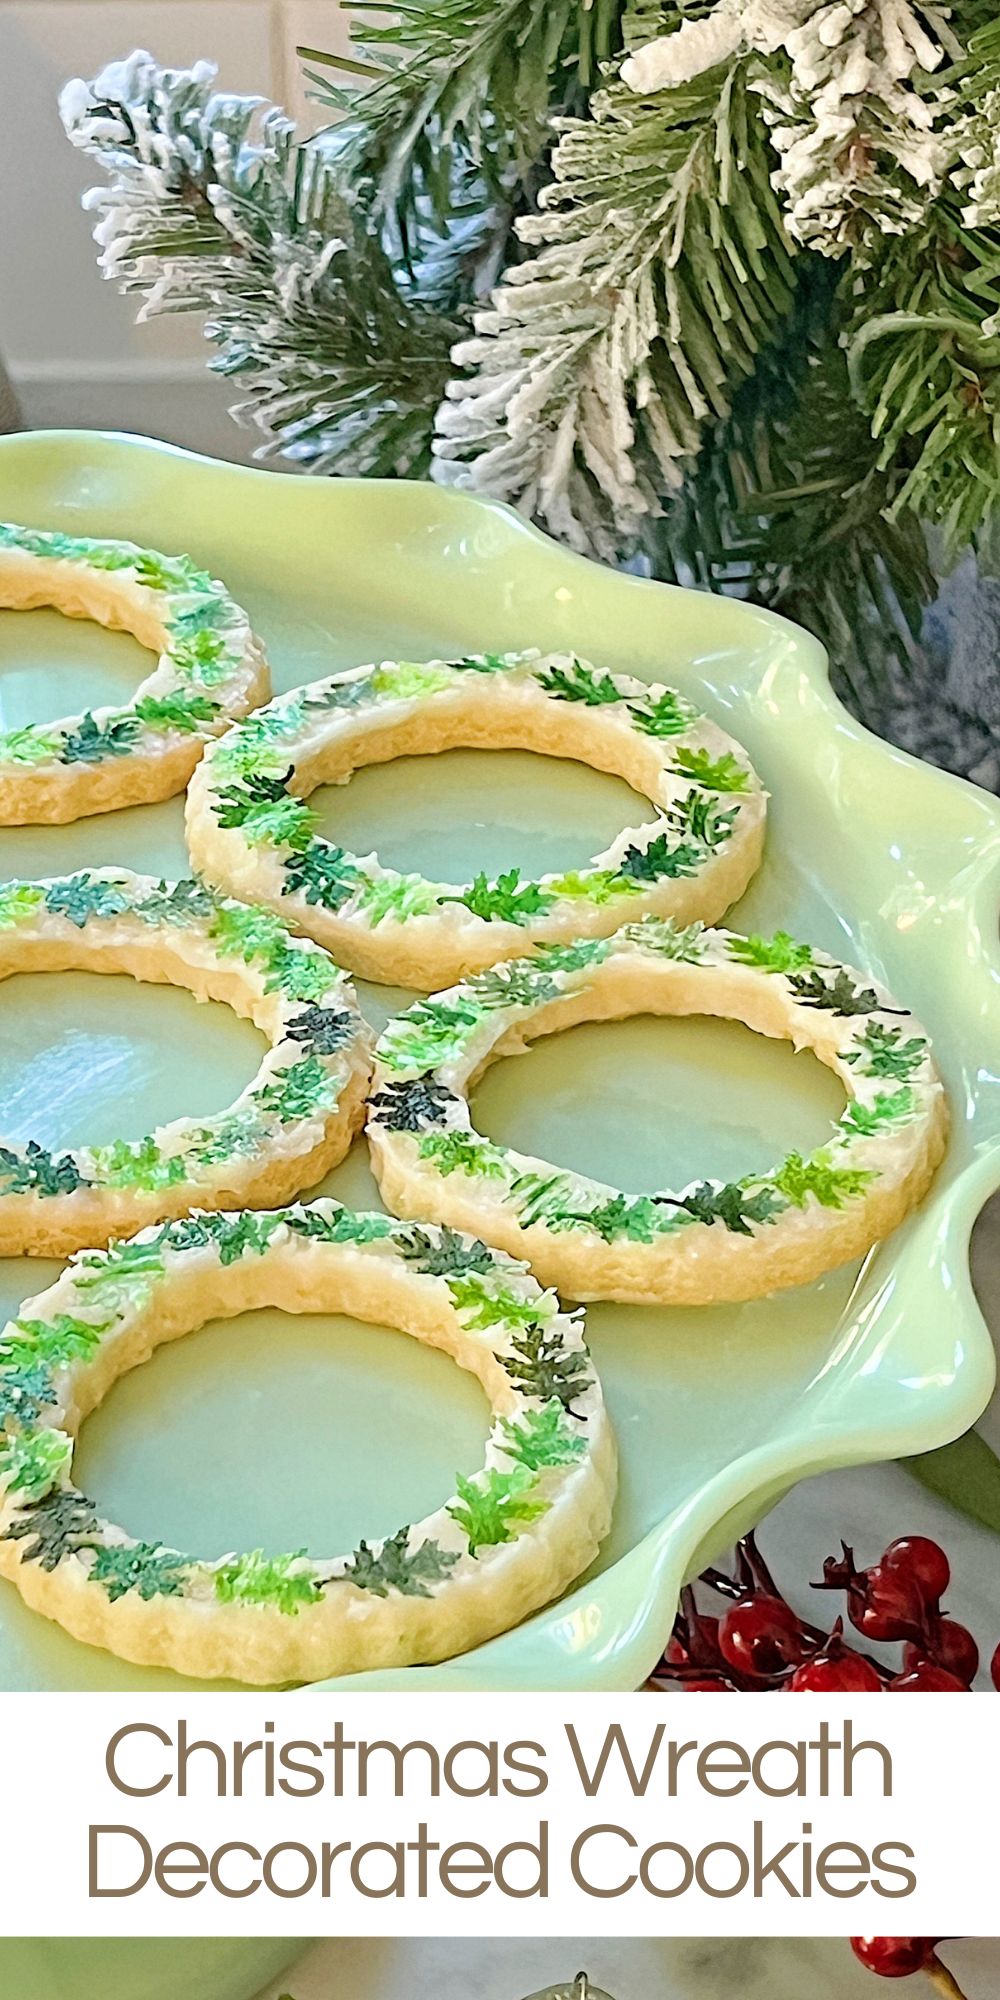 I made these Christmas wreath decorated cookies with frosting and wreaths made from edible wafer paper cut with a hole-punch.